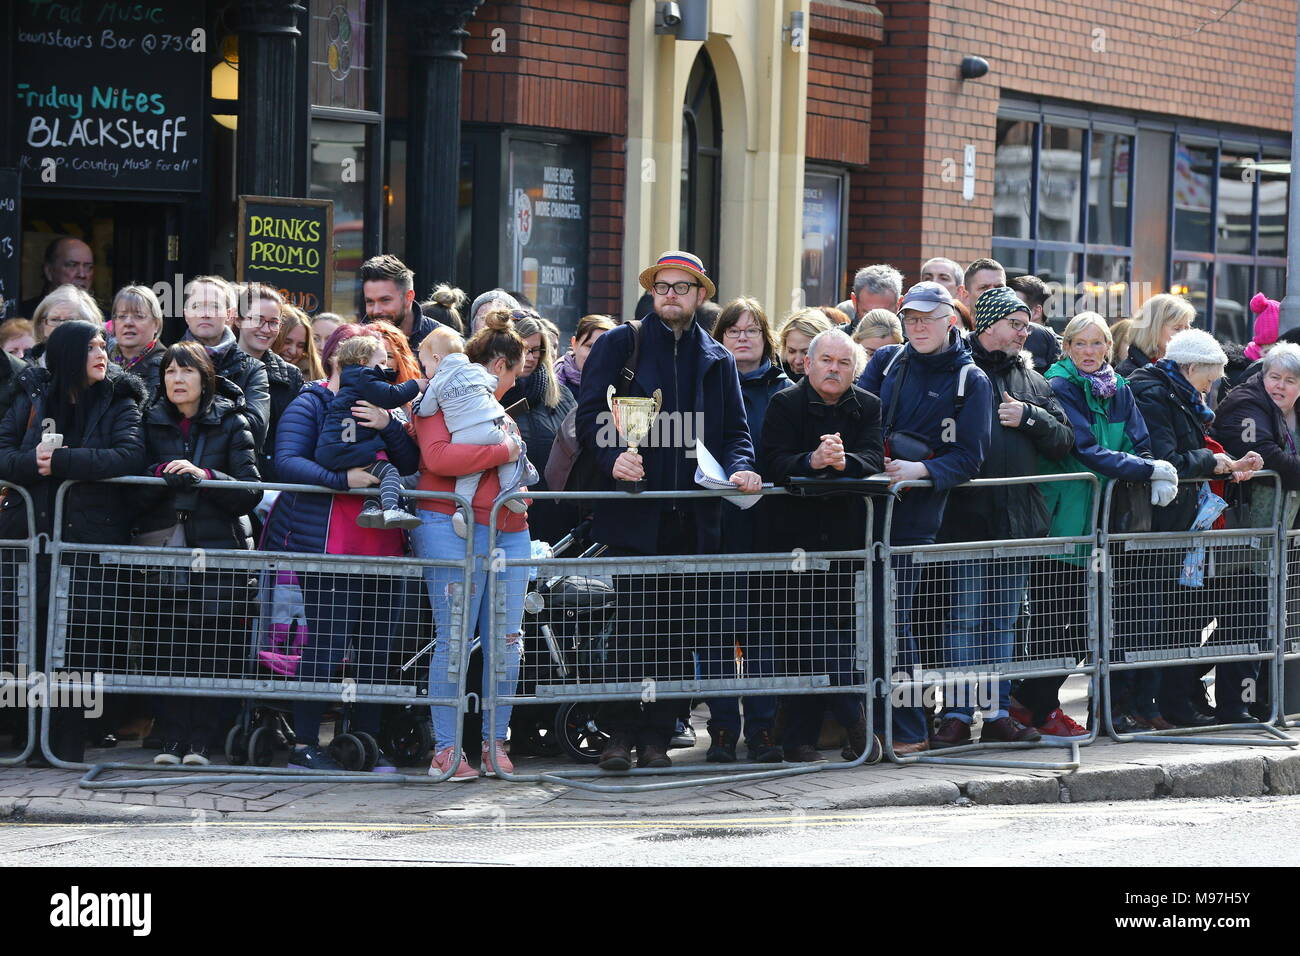 Crowds wait for Prince Harry and Meghan Markle to arrive for a walkabout in Belfast City centre where they will visit the Crown Bar and learn from National Trust representatives about the pub's heritage, and meet bar staff, local comedians and musicians. Stock Photo